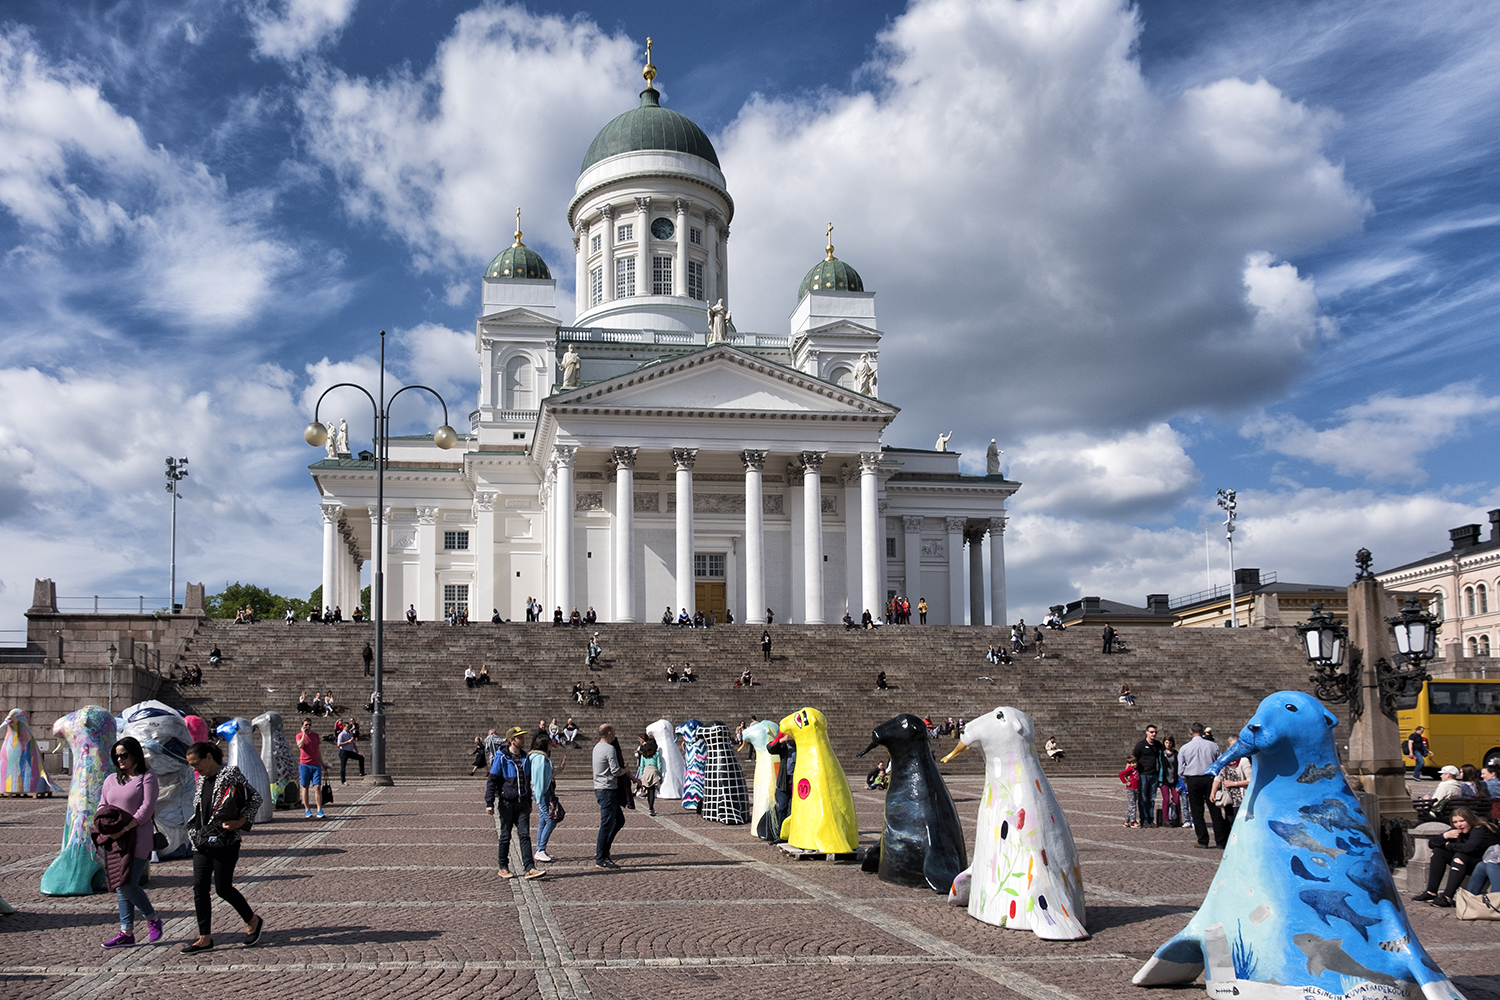 Senate Square and Helsinki Cathedral